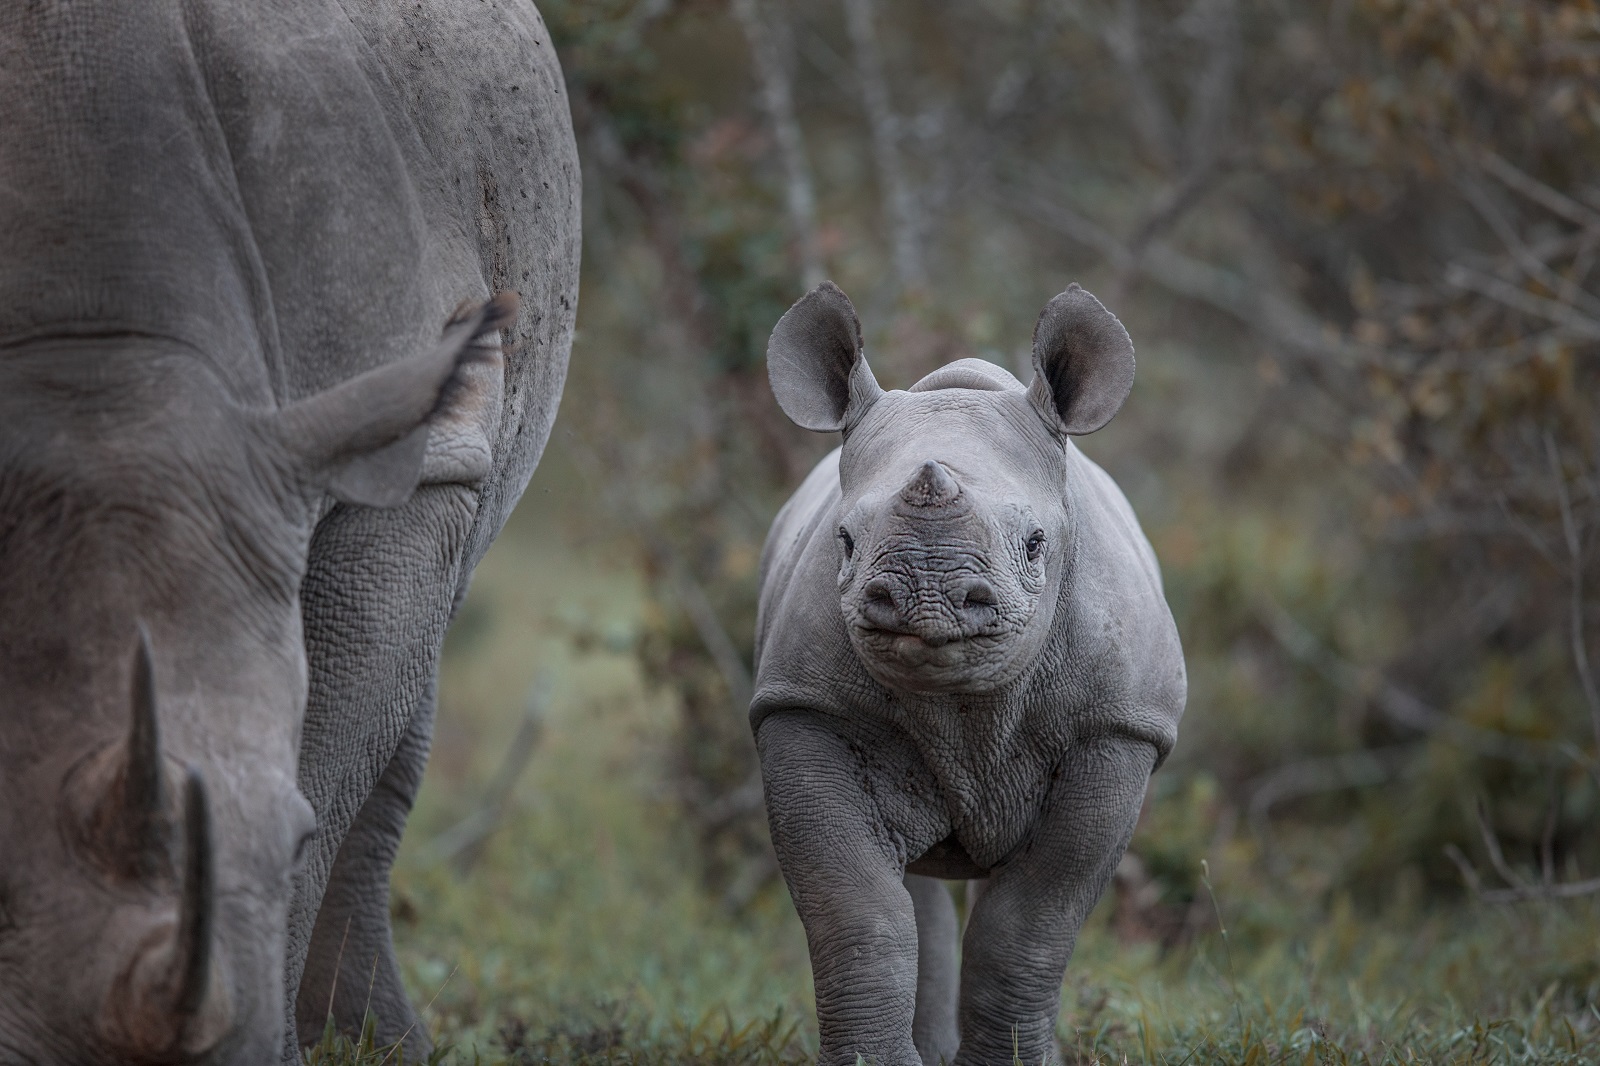 A close-up shot of a baby rhino, who is looking directly at the camera. To the left, the mother rhino stands protectively close, grazing on grass.